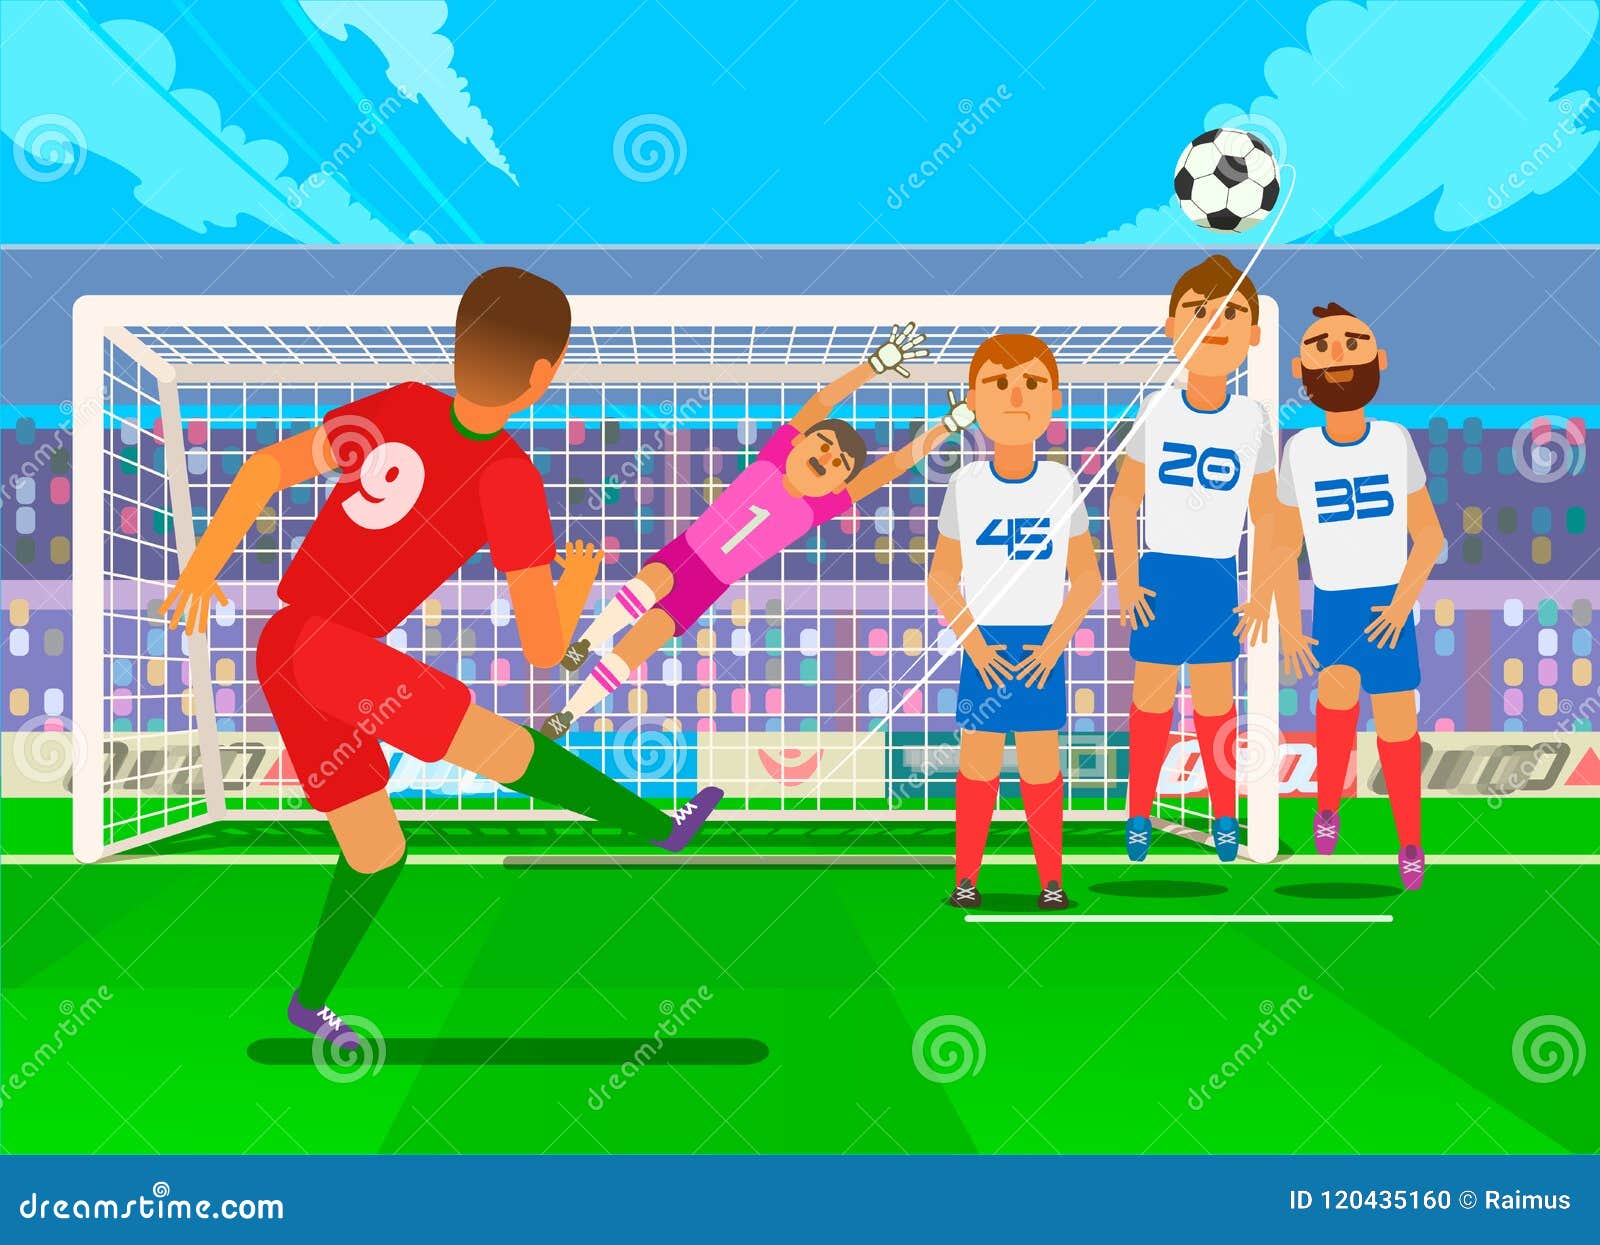 Free Kick In Football National Teams In The Championship Vector Flat Illustration Stock Vector Illustration Of Penalty Opponent